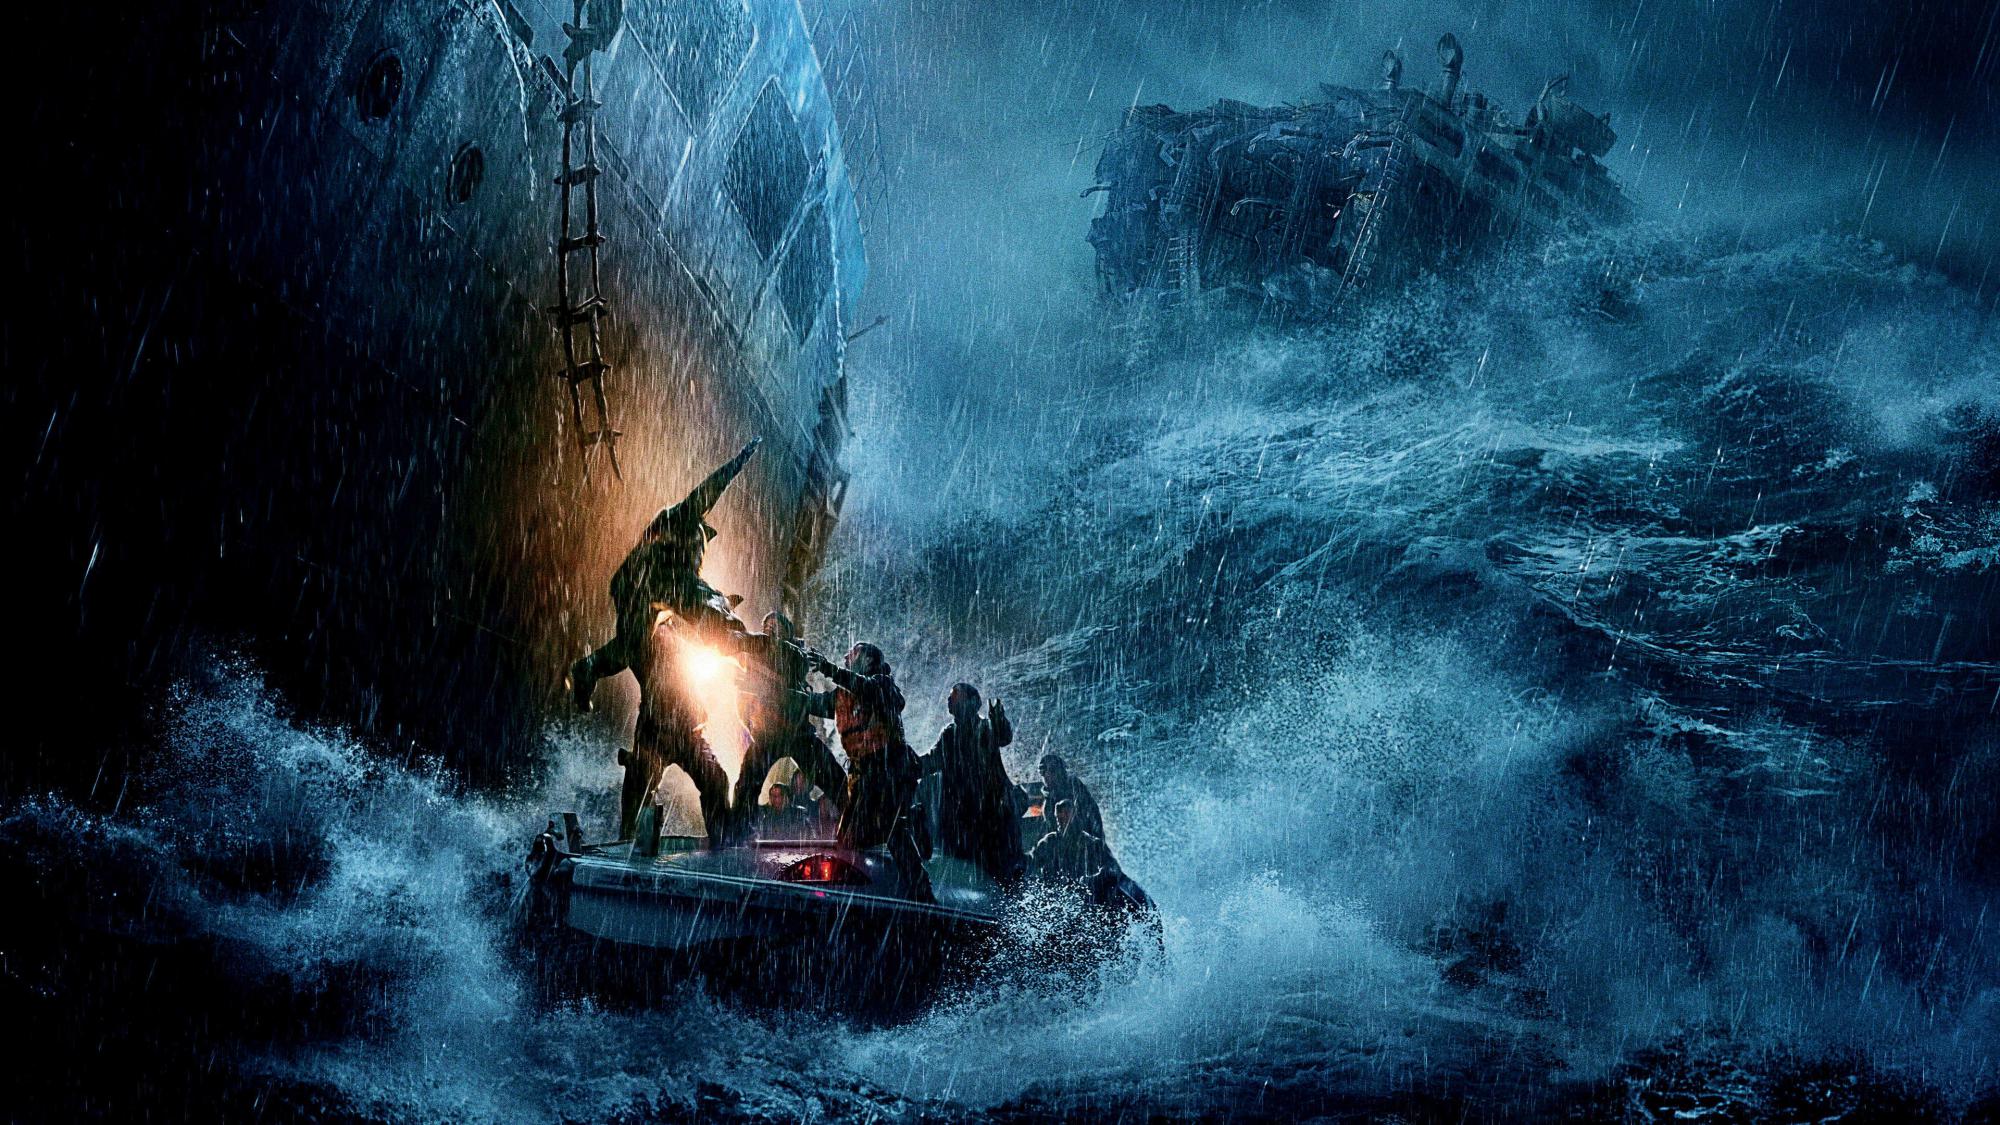 Backdrop Image for The finest hours